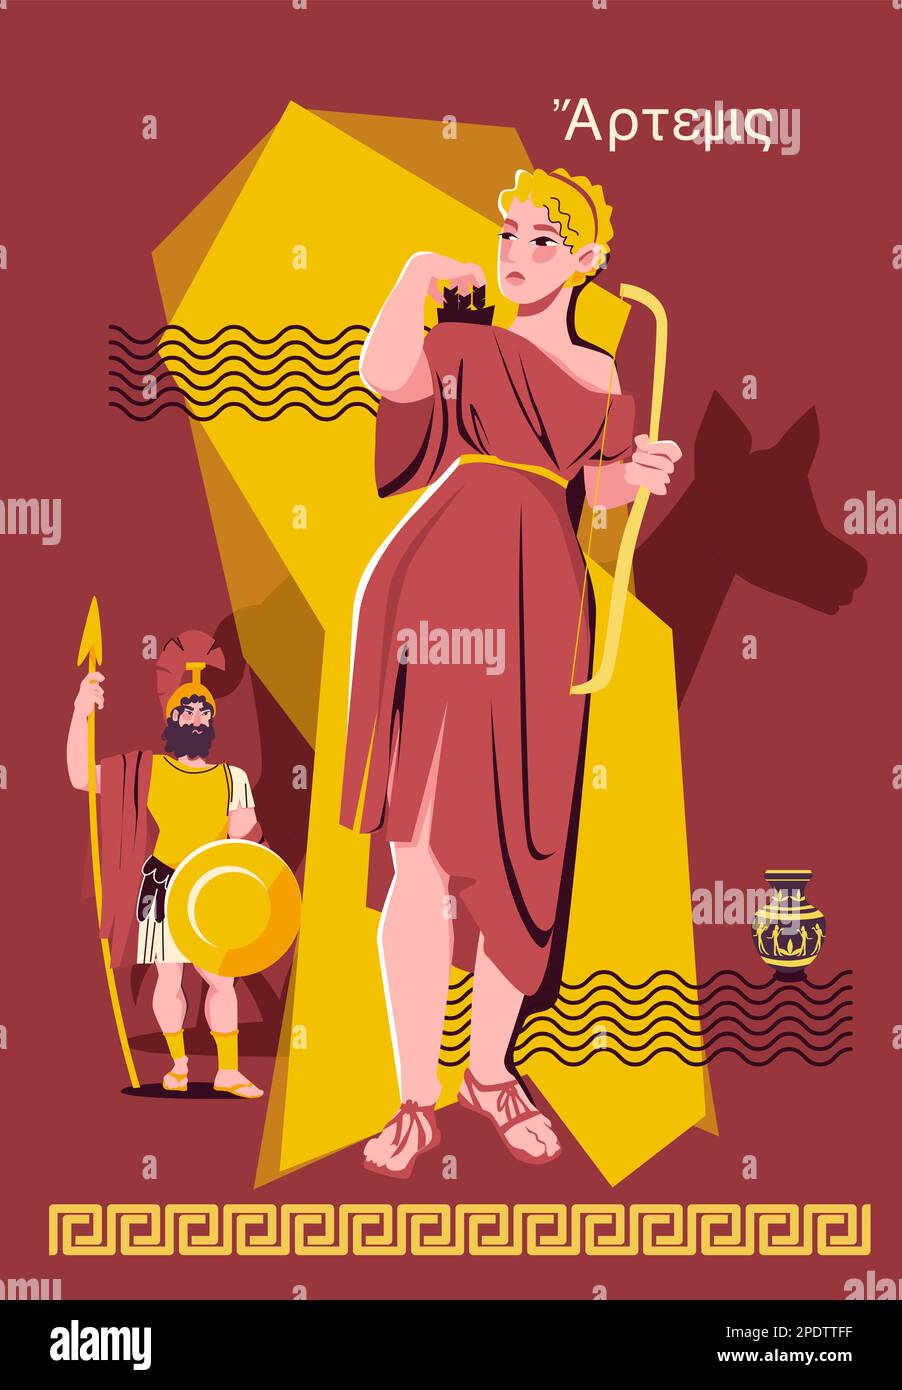 Olympian gods flat collage poster beautiful woman goddess poses in a brown and red outfit behind her stands a greek soldier in a military uniform vect Stock Vector